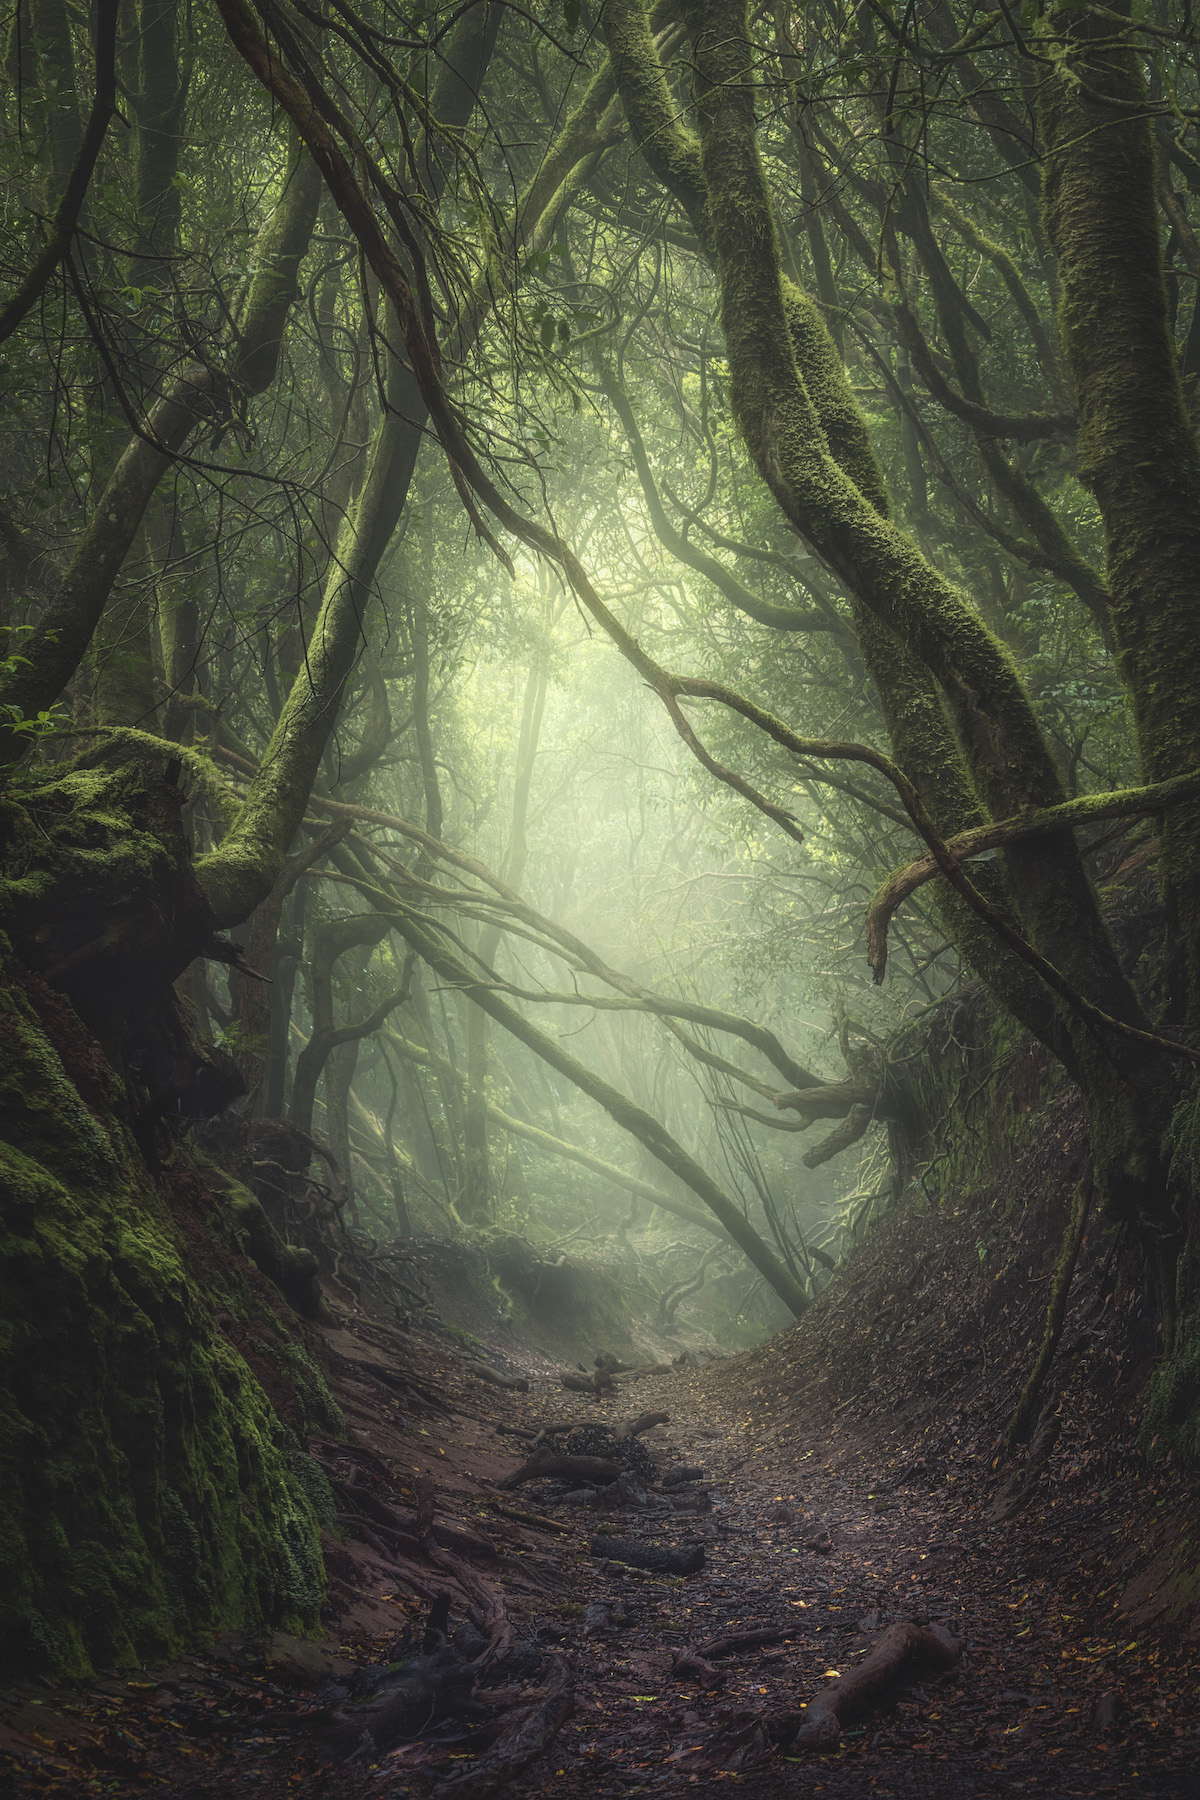 Forest of the Anaga Mountains in Tenerife